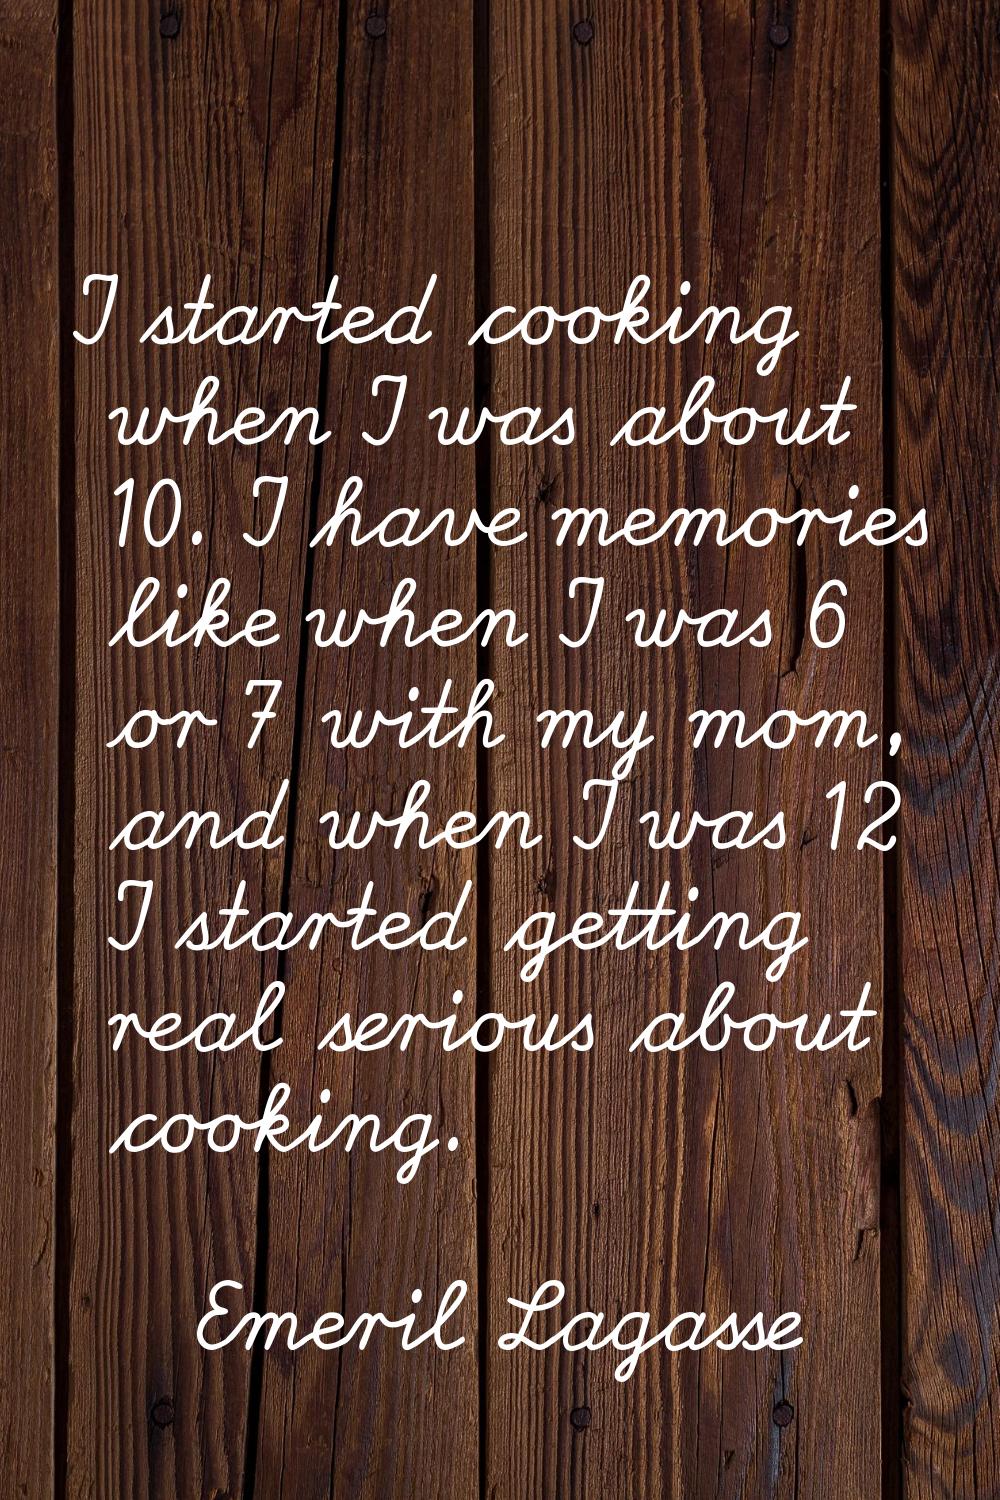 I started cooking when I was about 10. I have memories like when I was 6 or 7 with my mom, and when